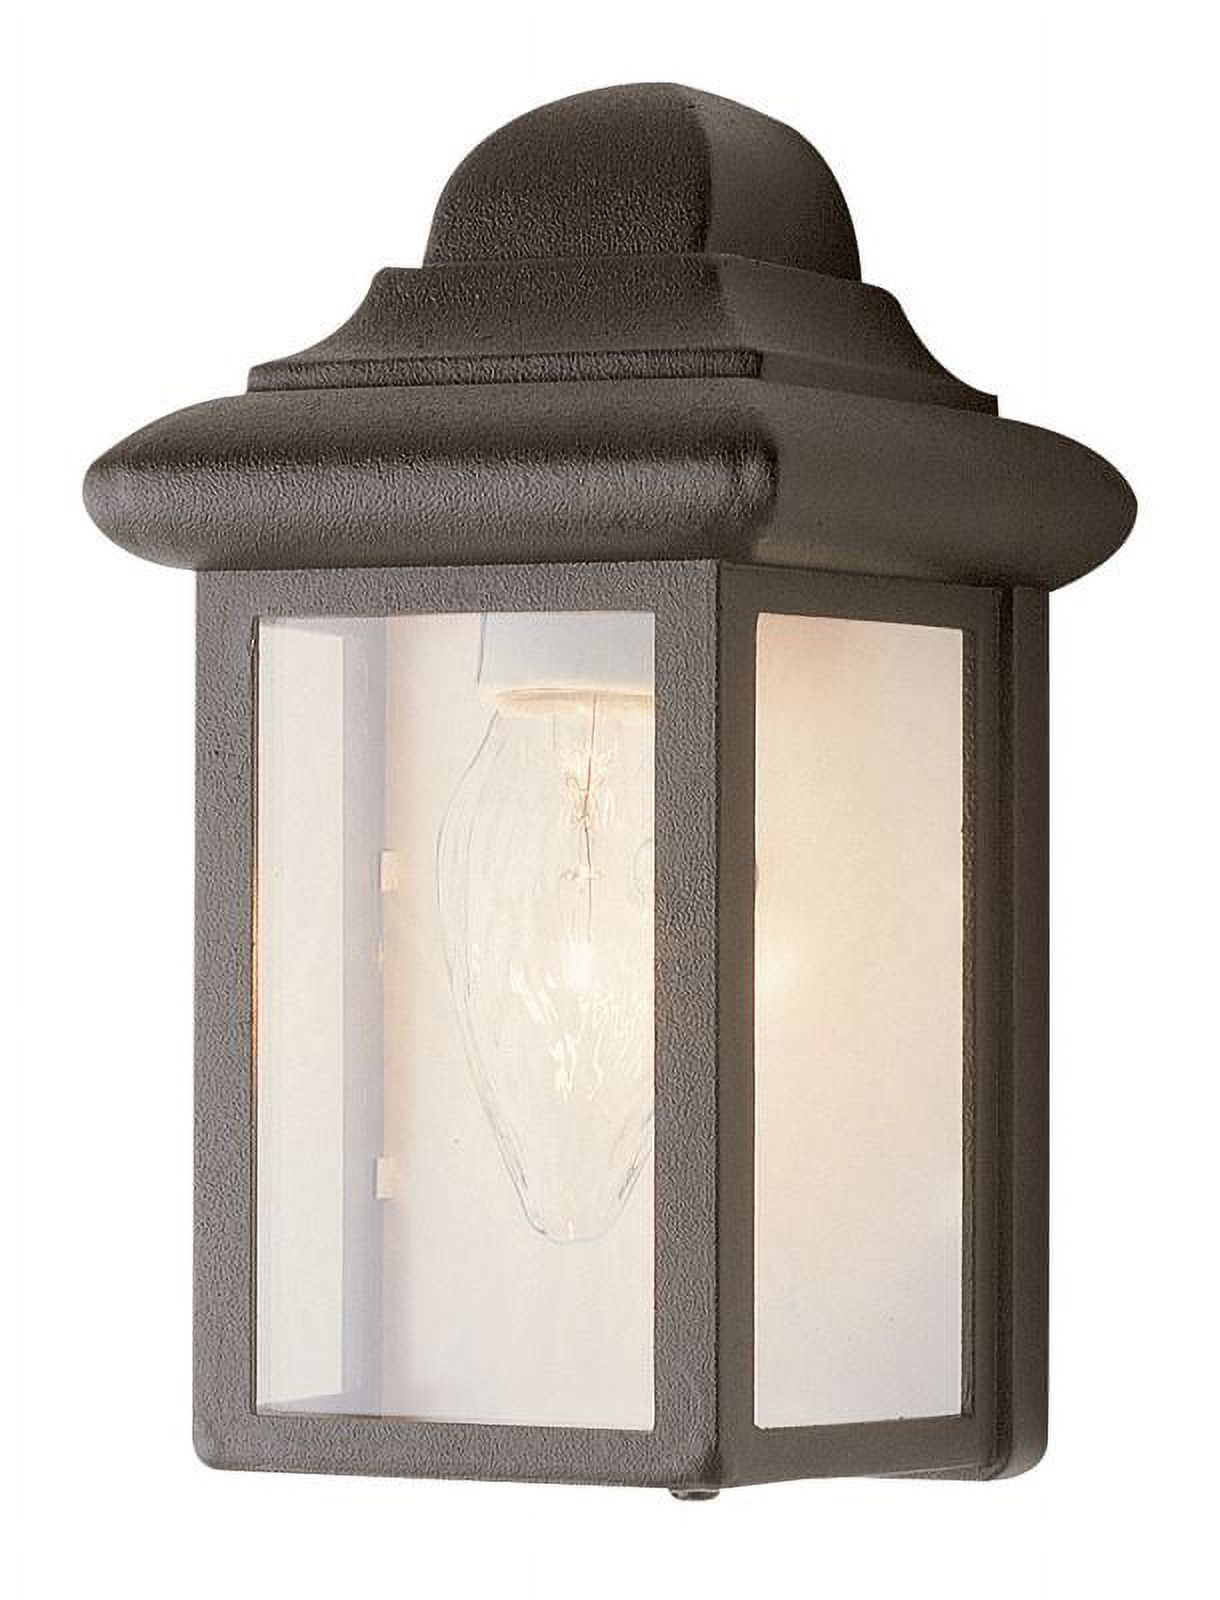 Trans Globe Lighting 44835 1 Light Down Lighting Outdoor Mini Wall Washer From The Outdoor - image 1 of 2